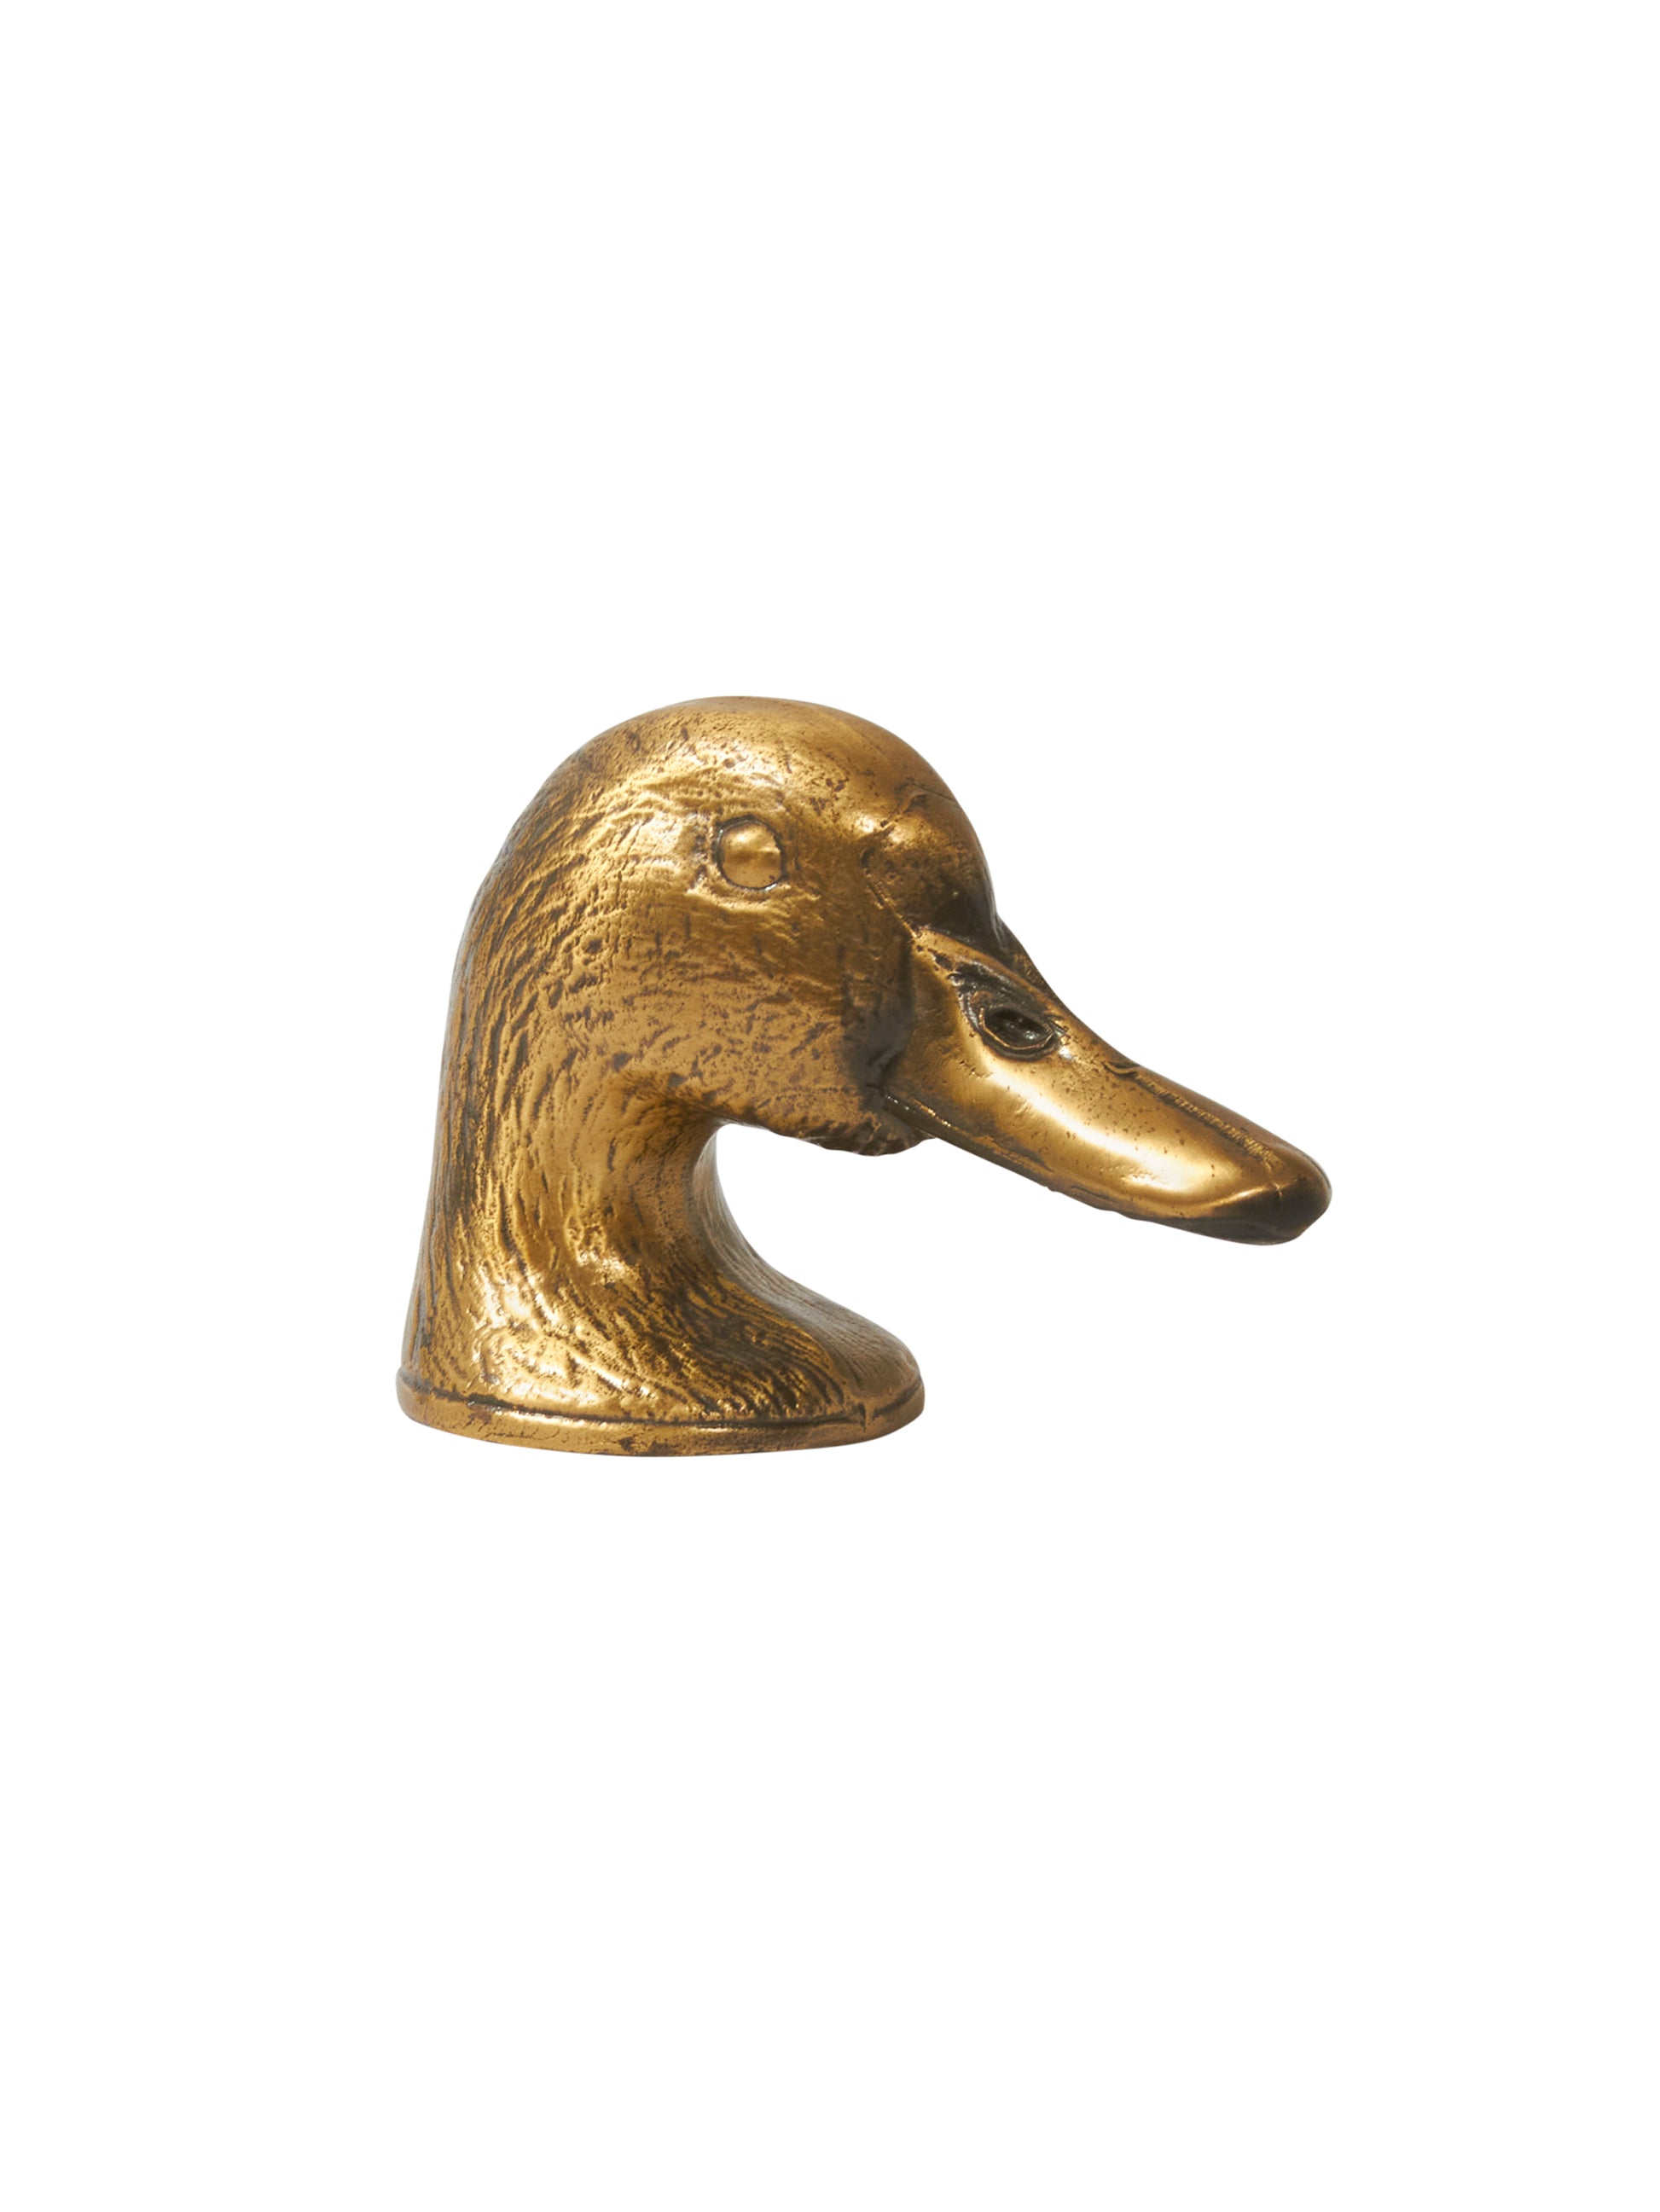 Shop the Vintage Textured Brass Duck Head Bottle Opener at Weston Table